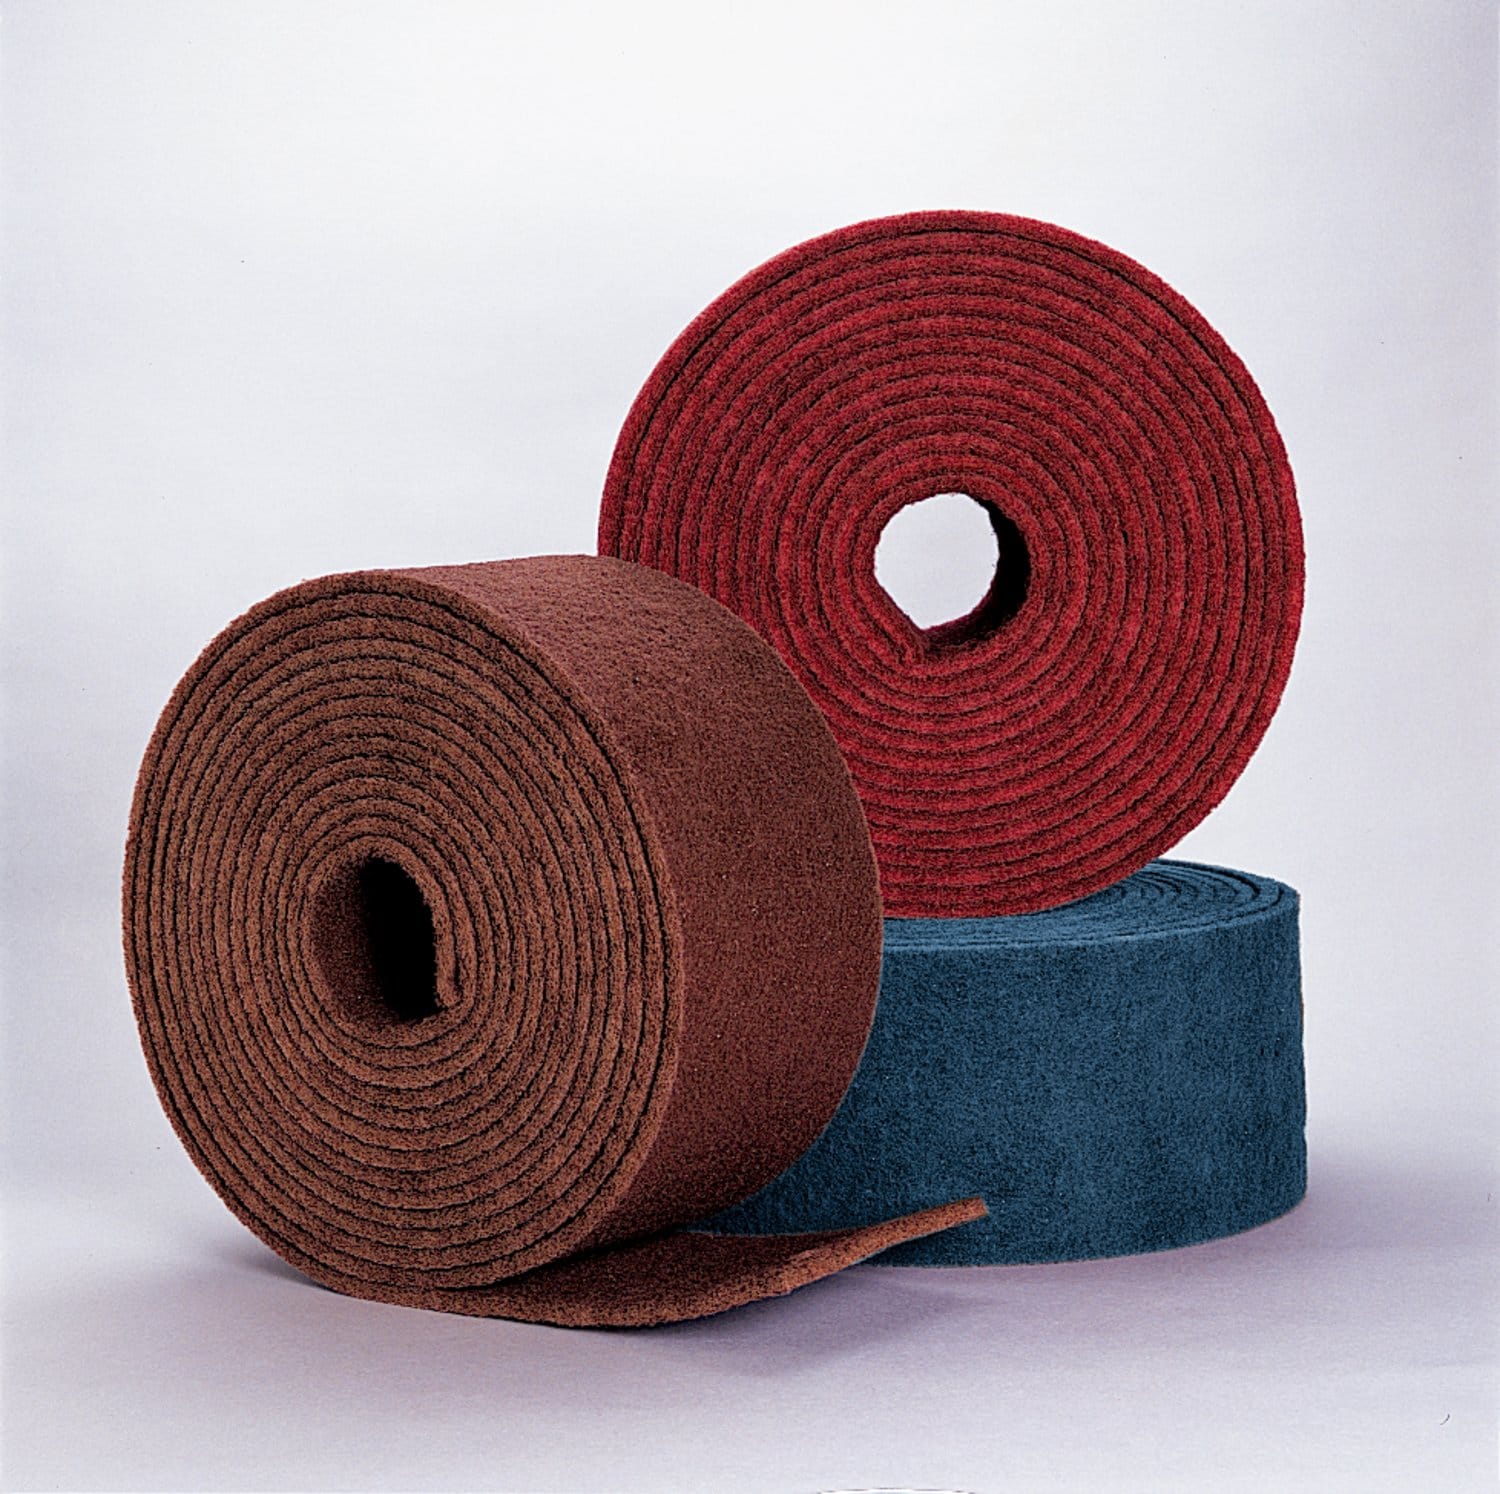 7010368521 - Standard Abrasives S/C Buff and Blend GP Roll 830026, 6 in x 30 ft S
VFN, 2 ea/Case